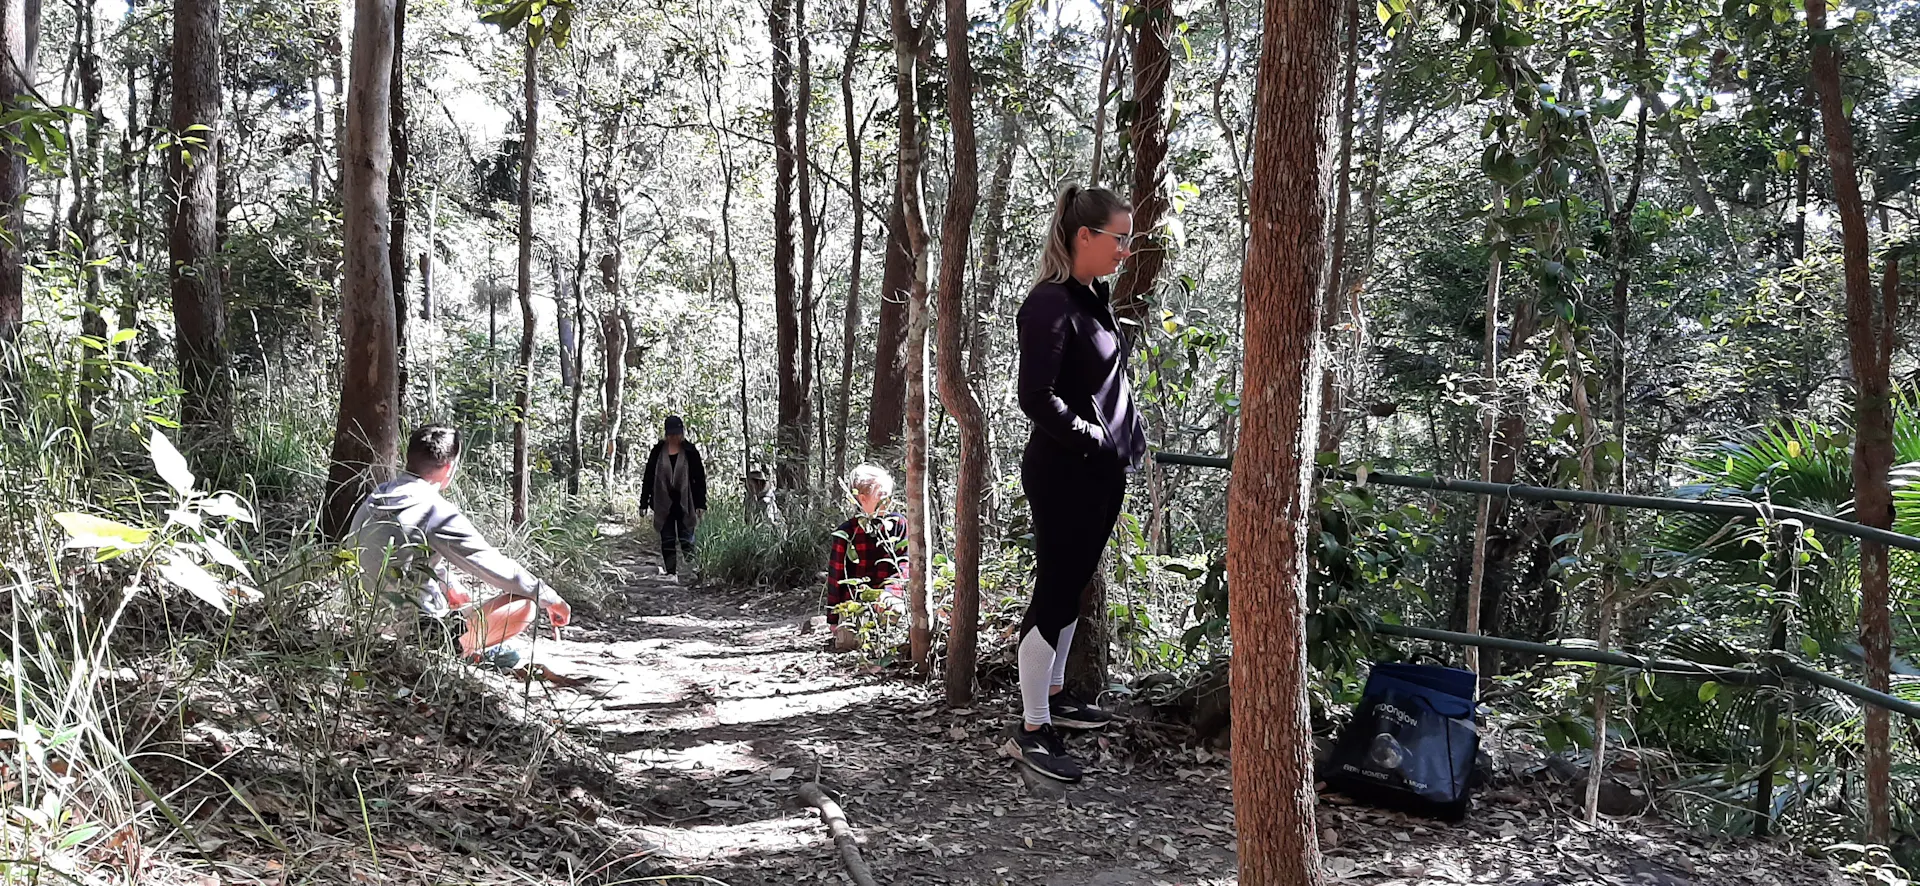 children and adults in bush, open eucalypt forest path